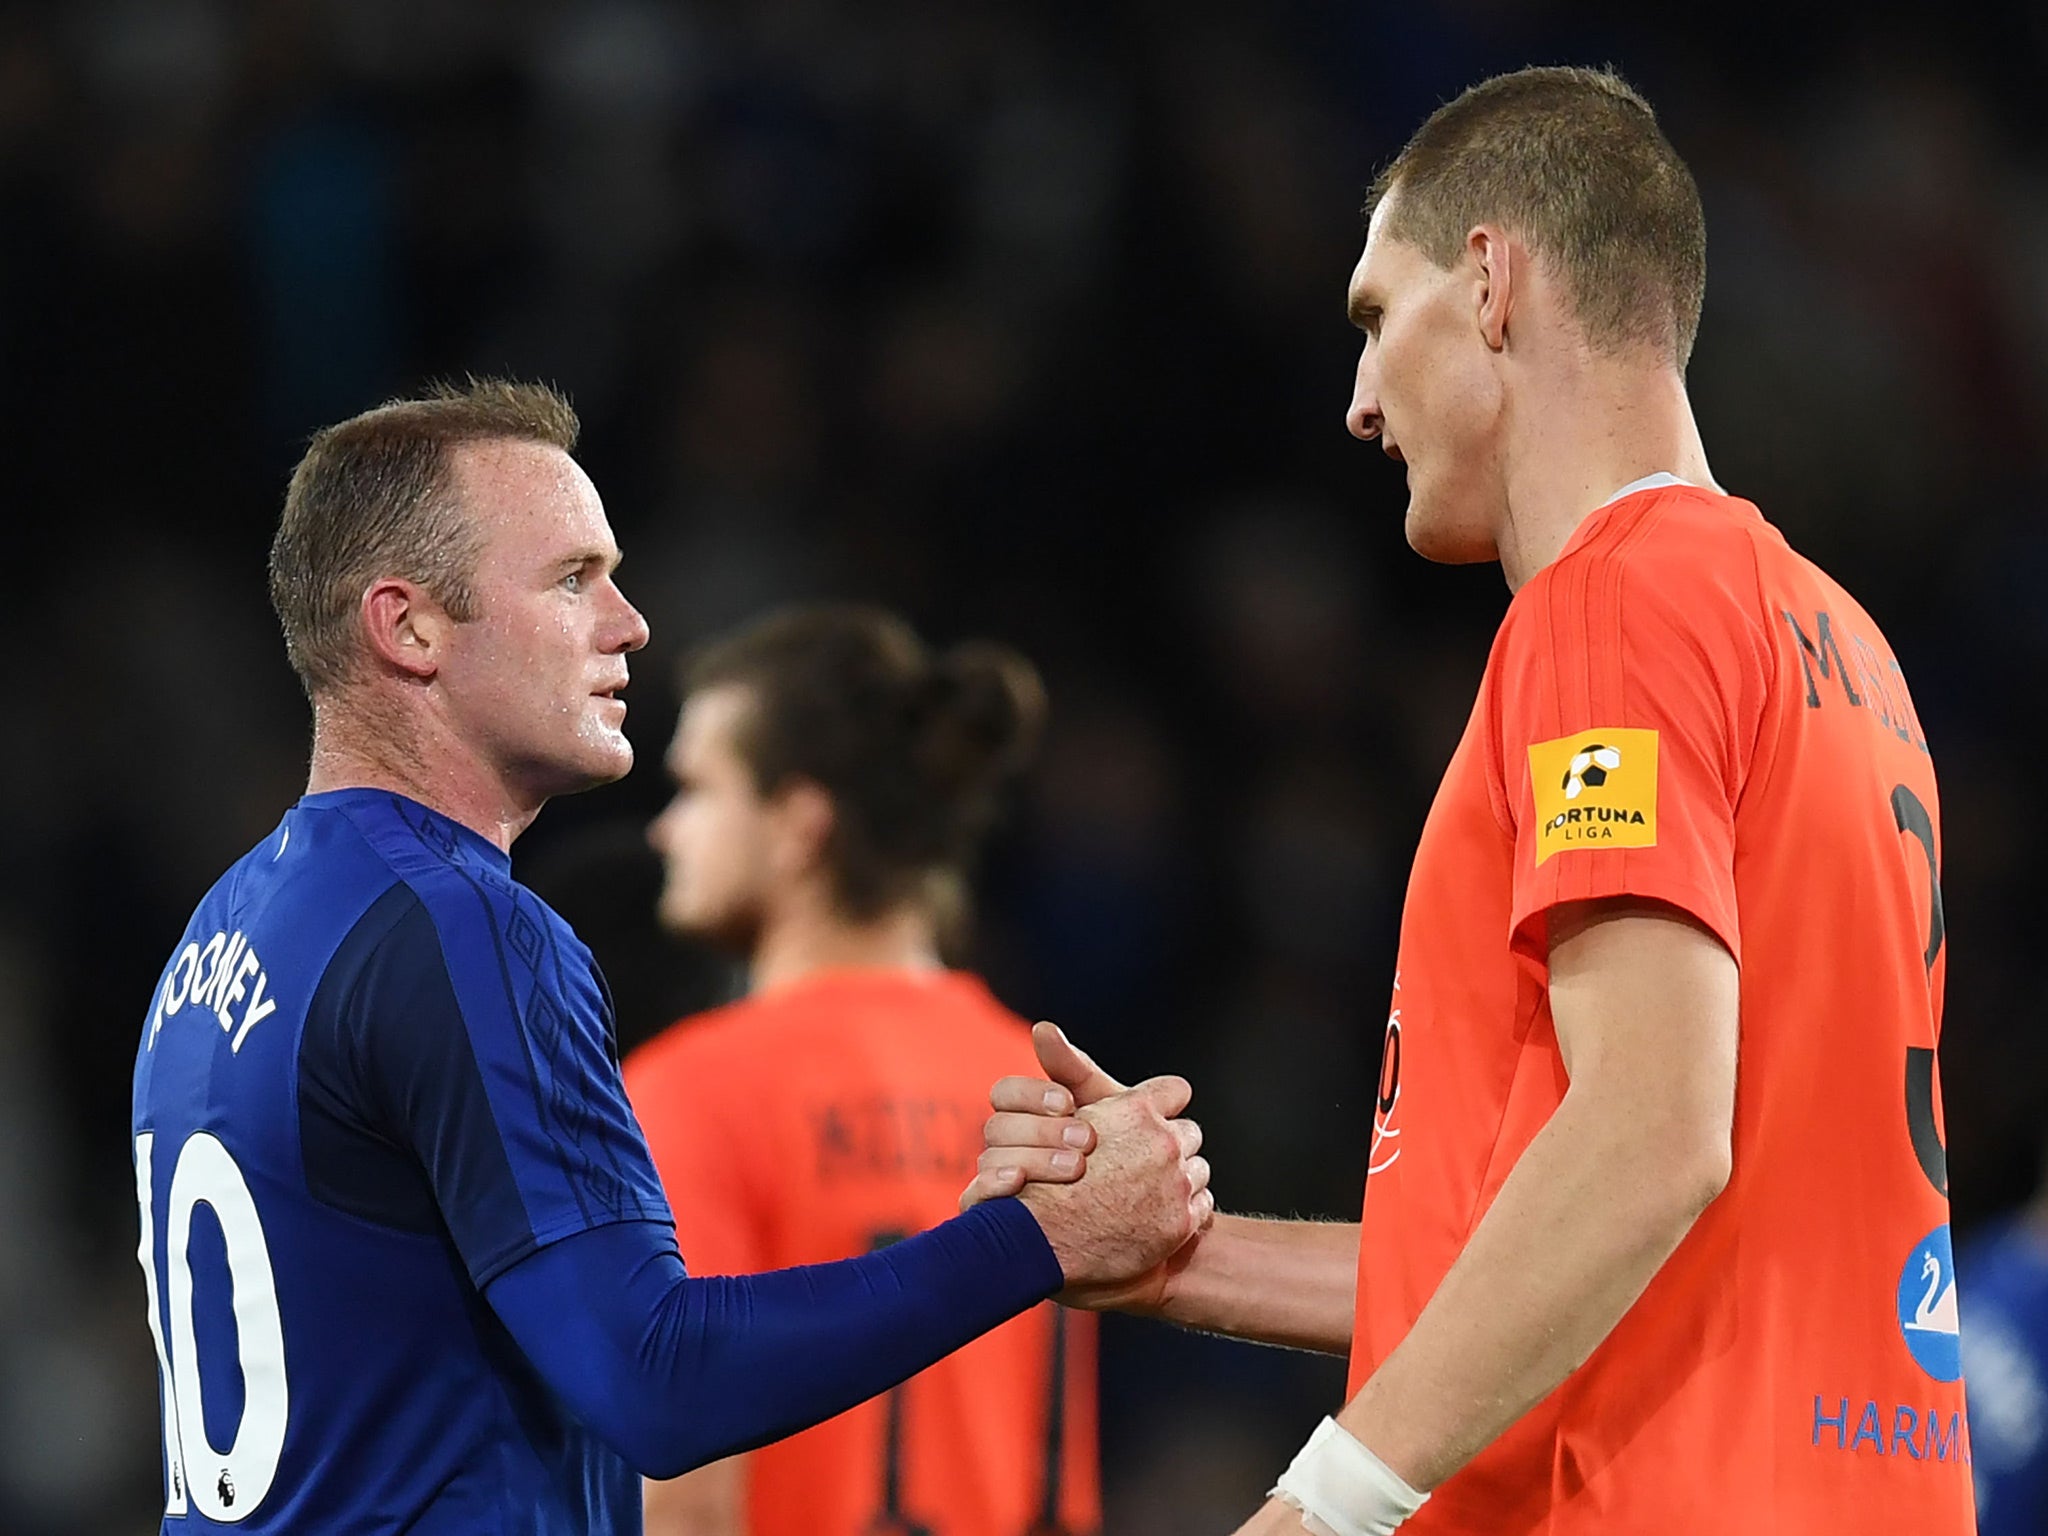 Wayne Rooney's first game back at Everton ended in a narrow victory